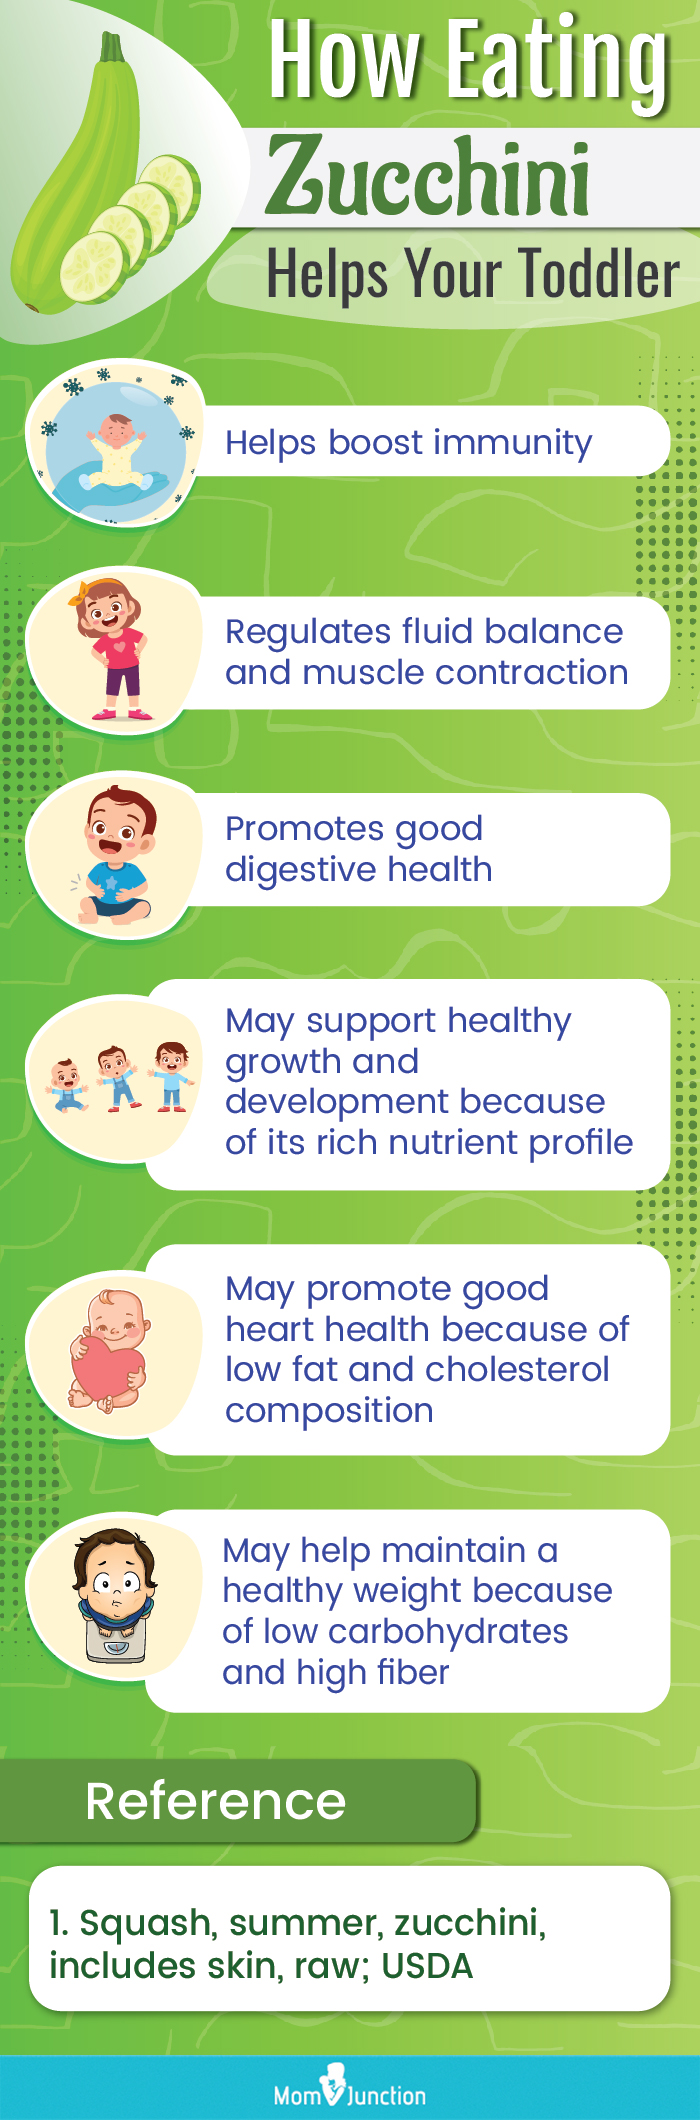 zucchini benefits for toddlers (infographic)